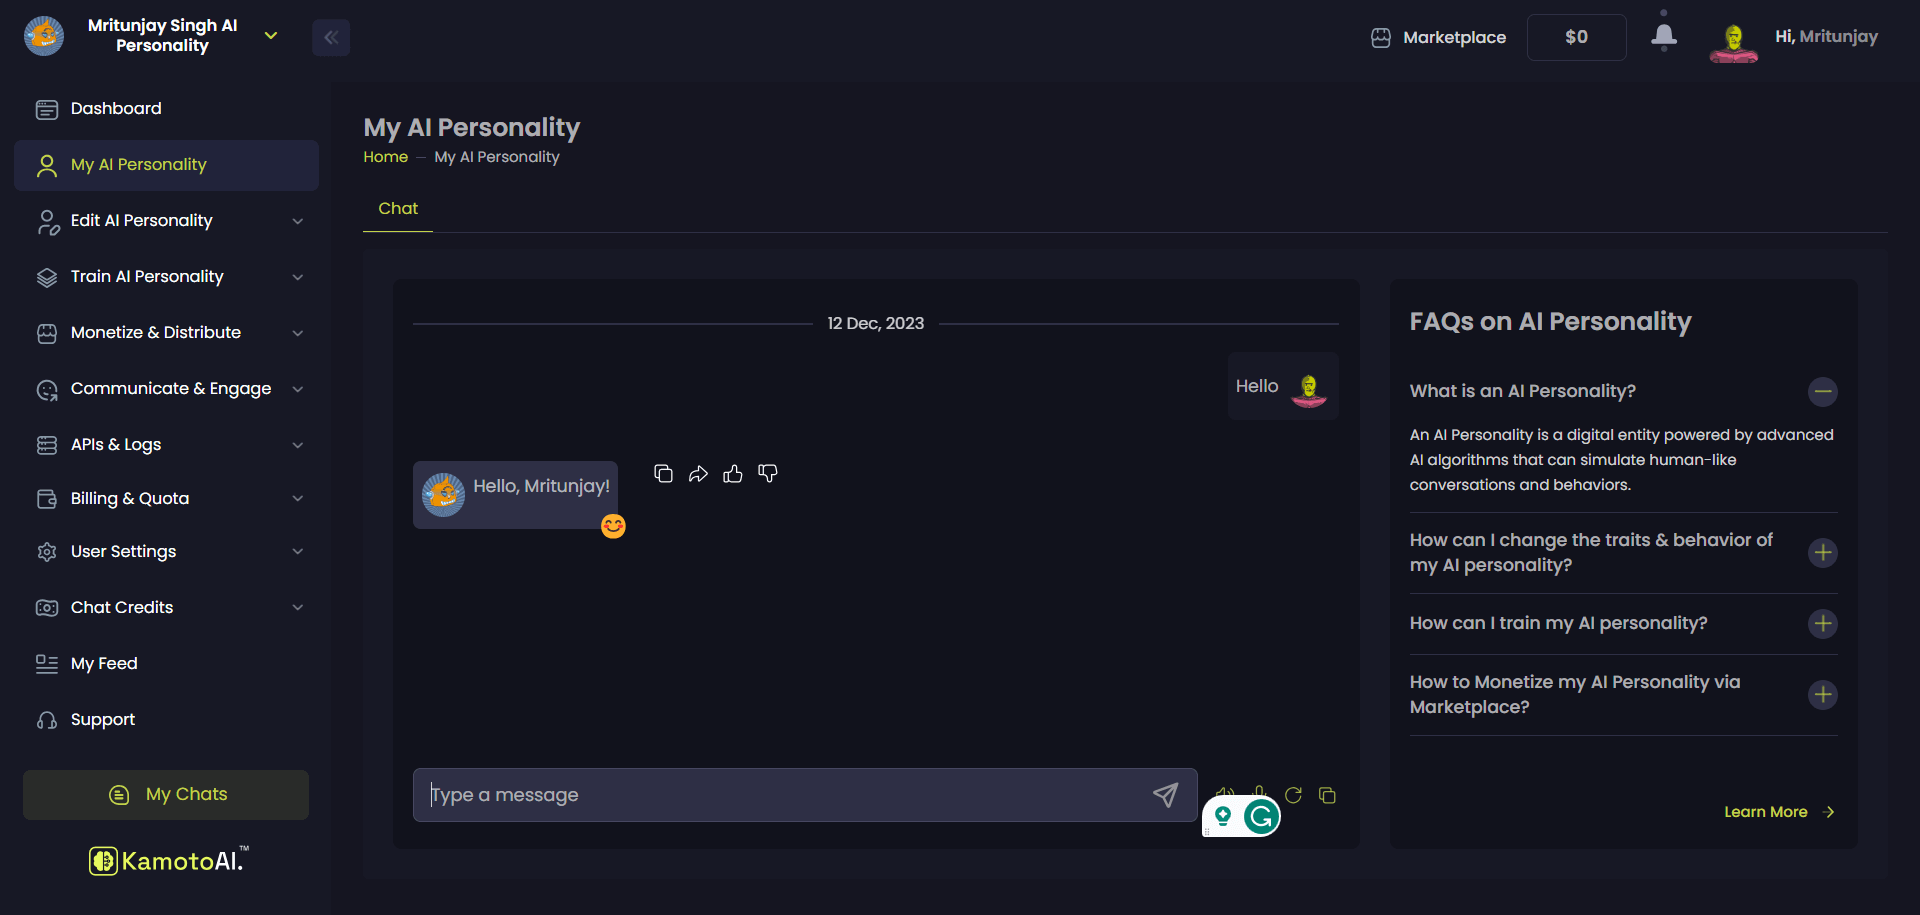 My AI Personality user interface in Kamoto AI displaying a chat box with AI